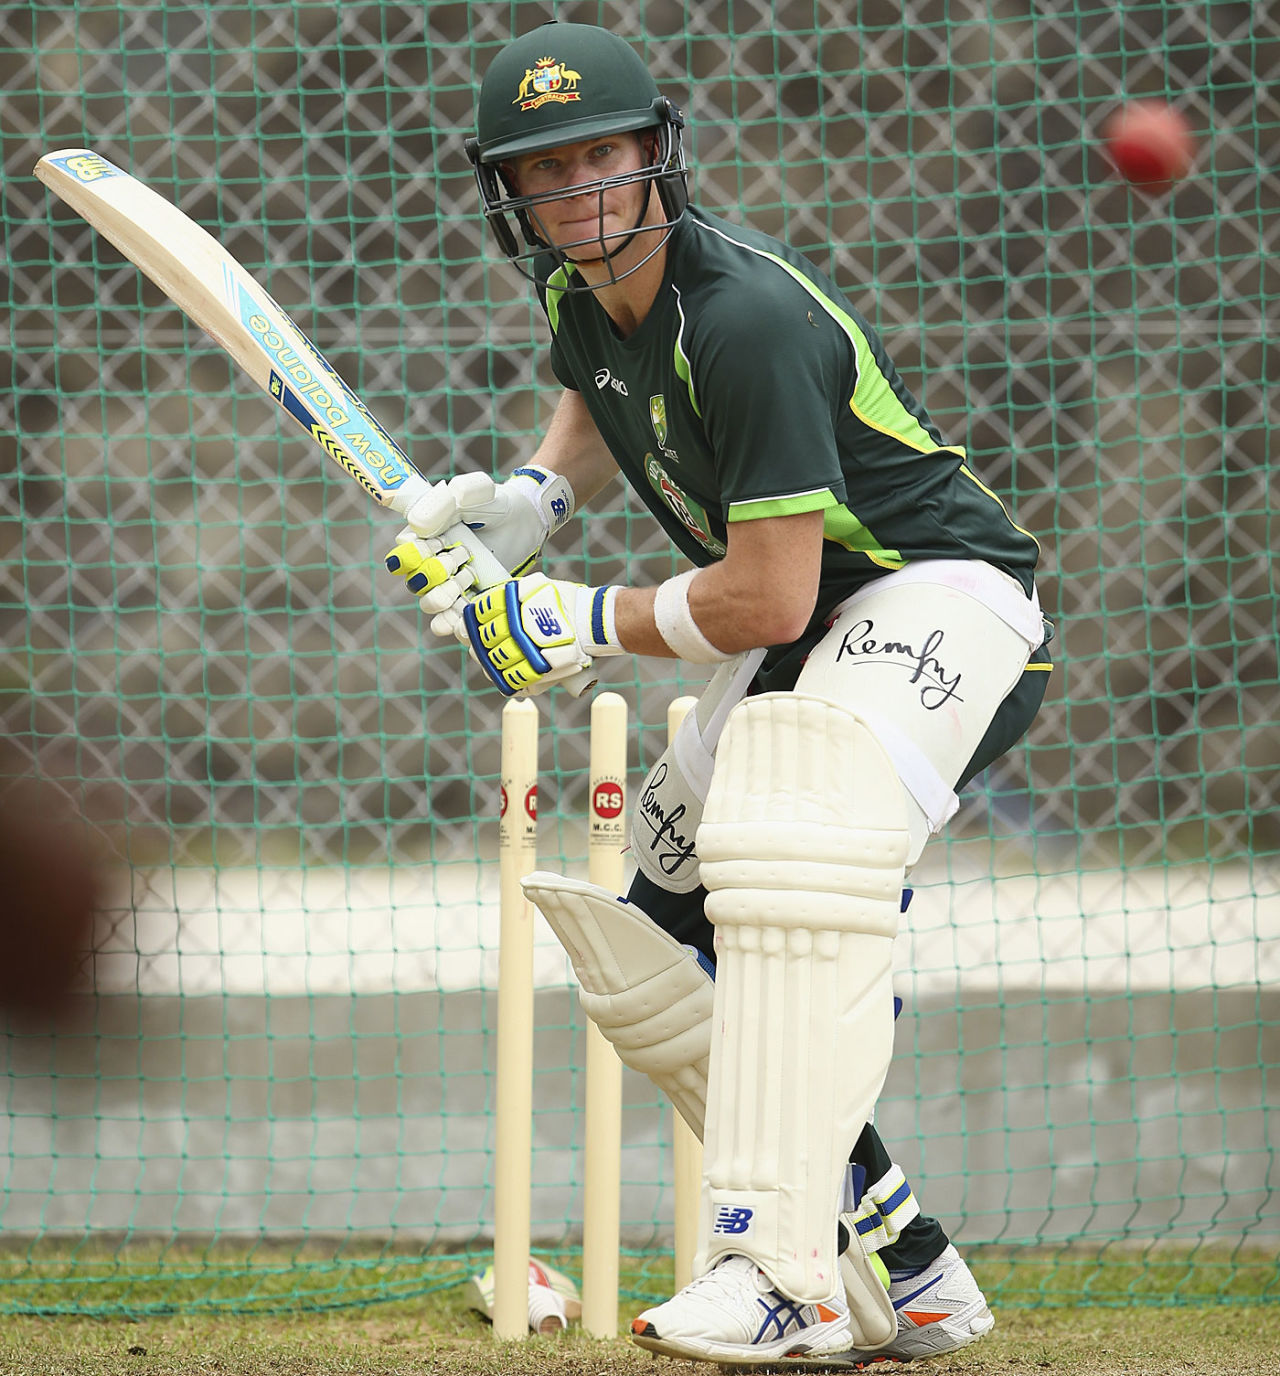 Steven Smith bats in the nets, Dominica, May 31, 2015